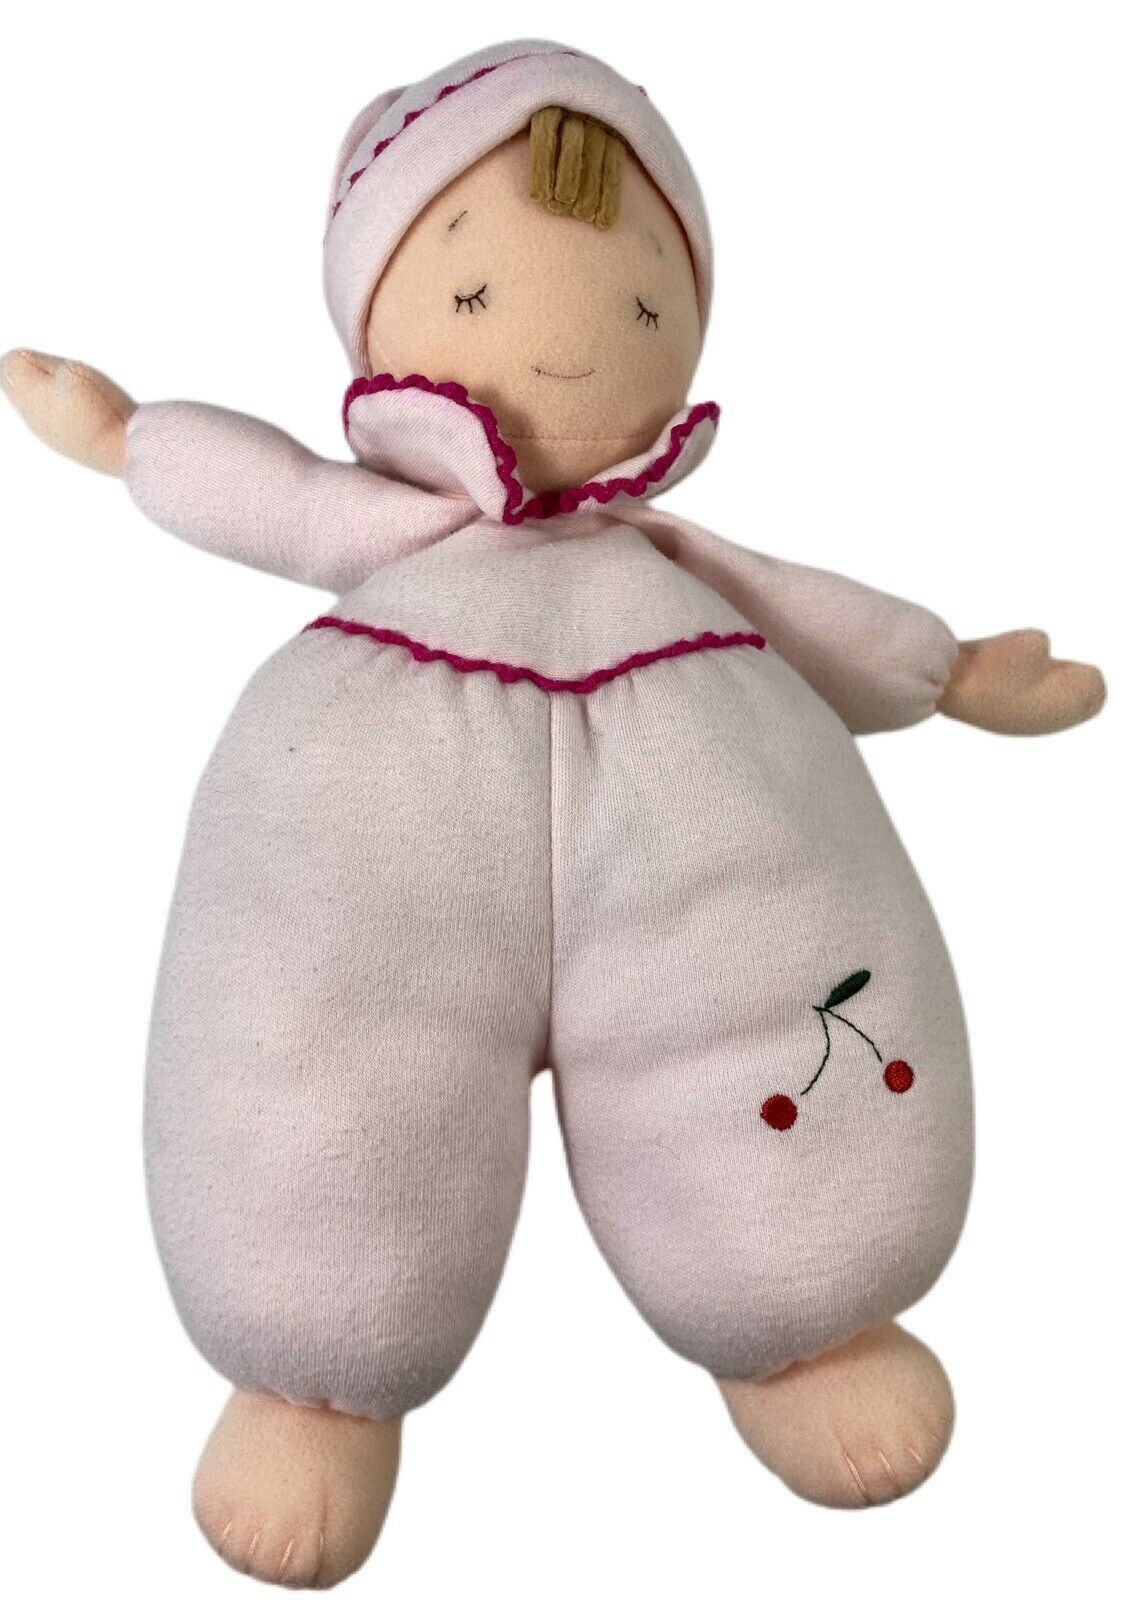 North American Bear Cherry Baby Pink Baby Doll Lovey Security Plush Toy 2002 - $19.79